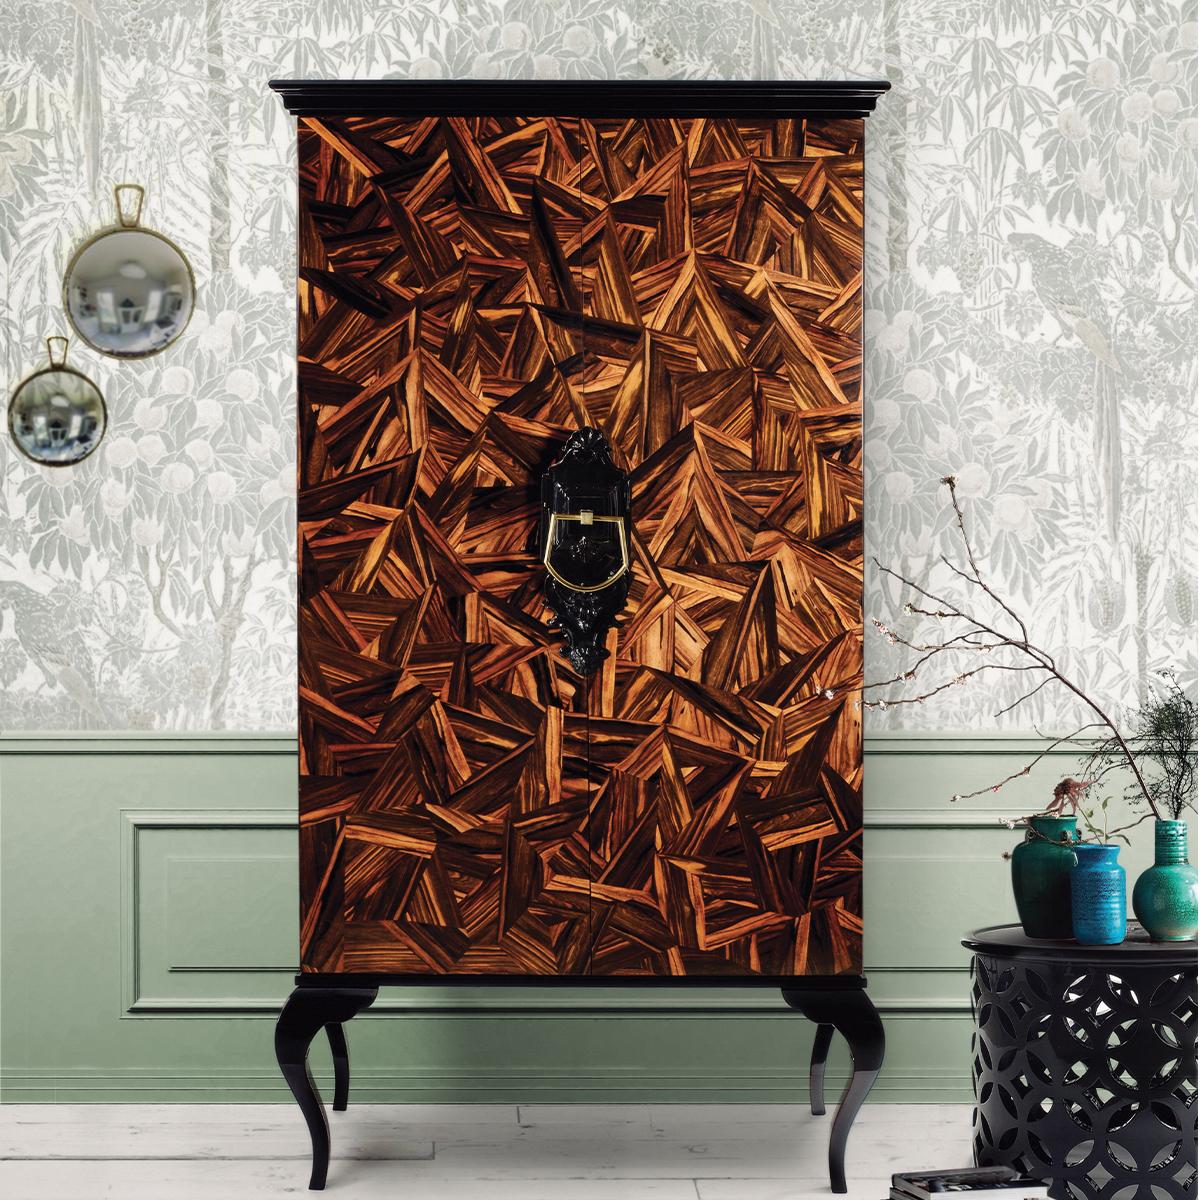 Cabinet patch in lacquered wood
Measures: Height 82.68 in. (210 cm)
Width 43.31 in. (110 cm)
Depth 19.3 in. (49 cm)
246 kg
Guggenheim cabinet is available in two finishes (rosewood or palisander), with black lacquered wood top and legs.
Estimated